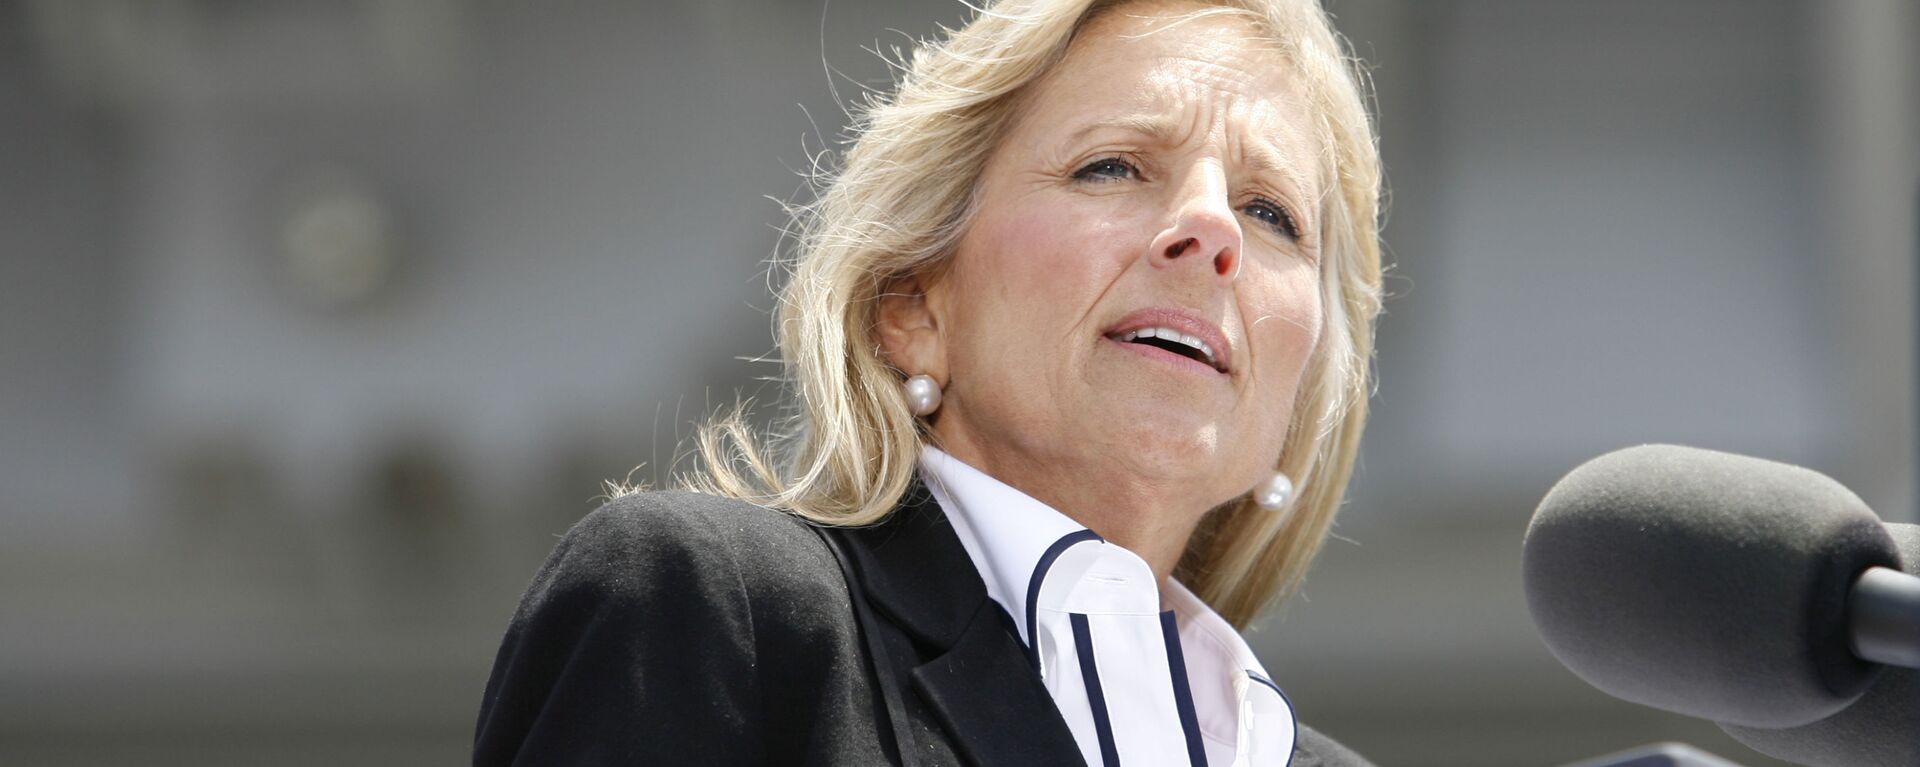 Dr. Jill Biden speaks to sailors in front of the USS Ronald Reagan at the Naval Air Station North Island in Coronado, Calif. Thursday, May 14, 2009. - Sputnik International, 1920, 12.07.2022